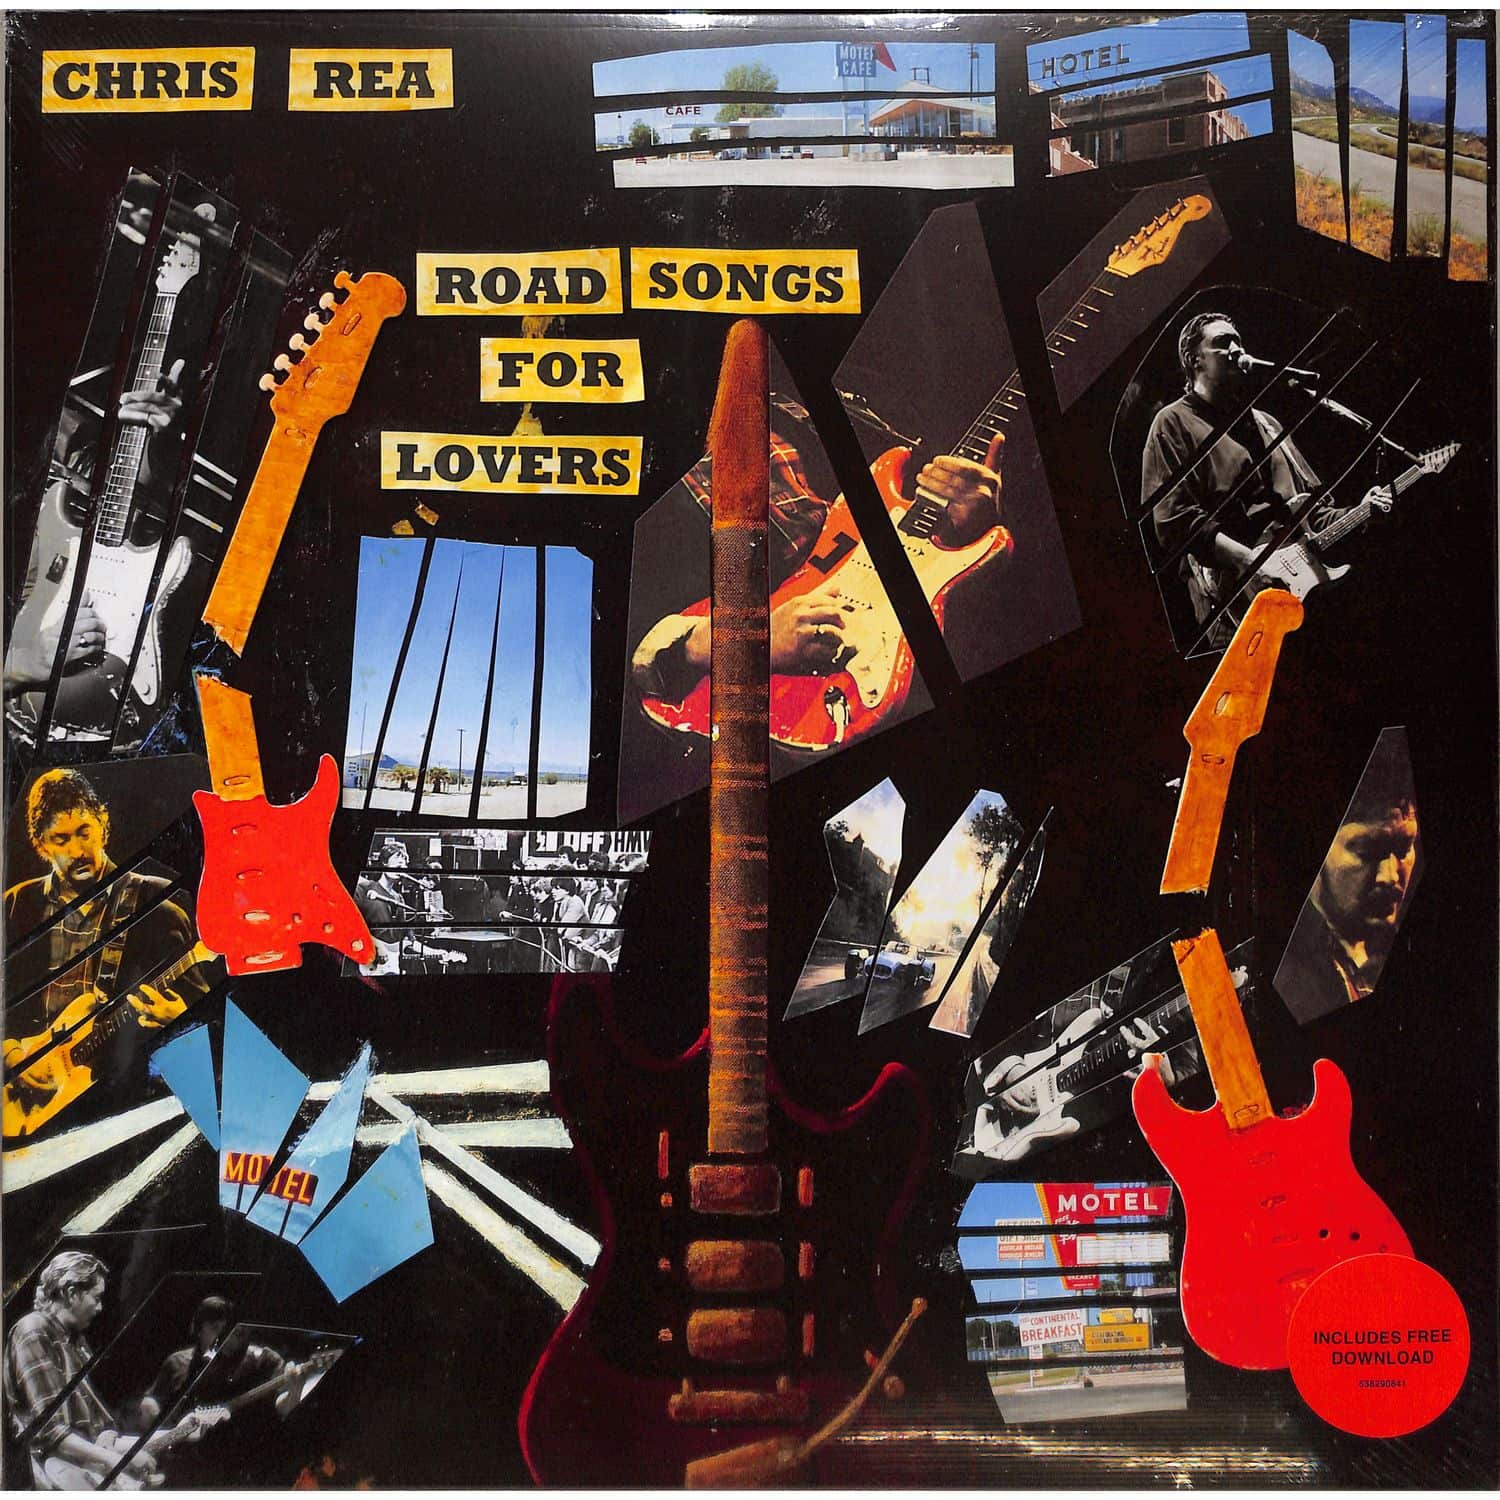 Chris Rea - ROAD SONGS FOR LOVERS 